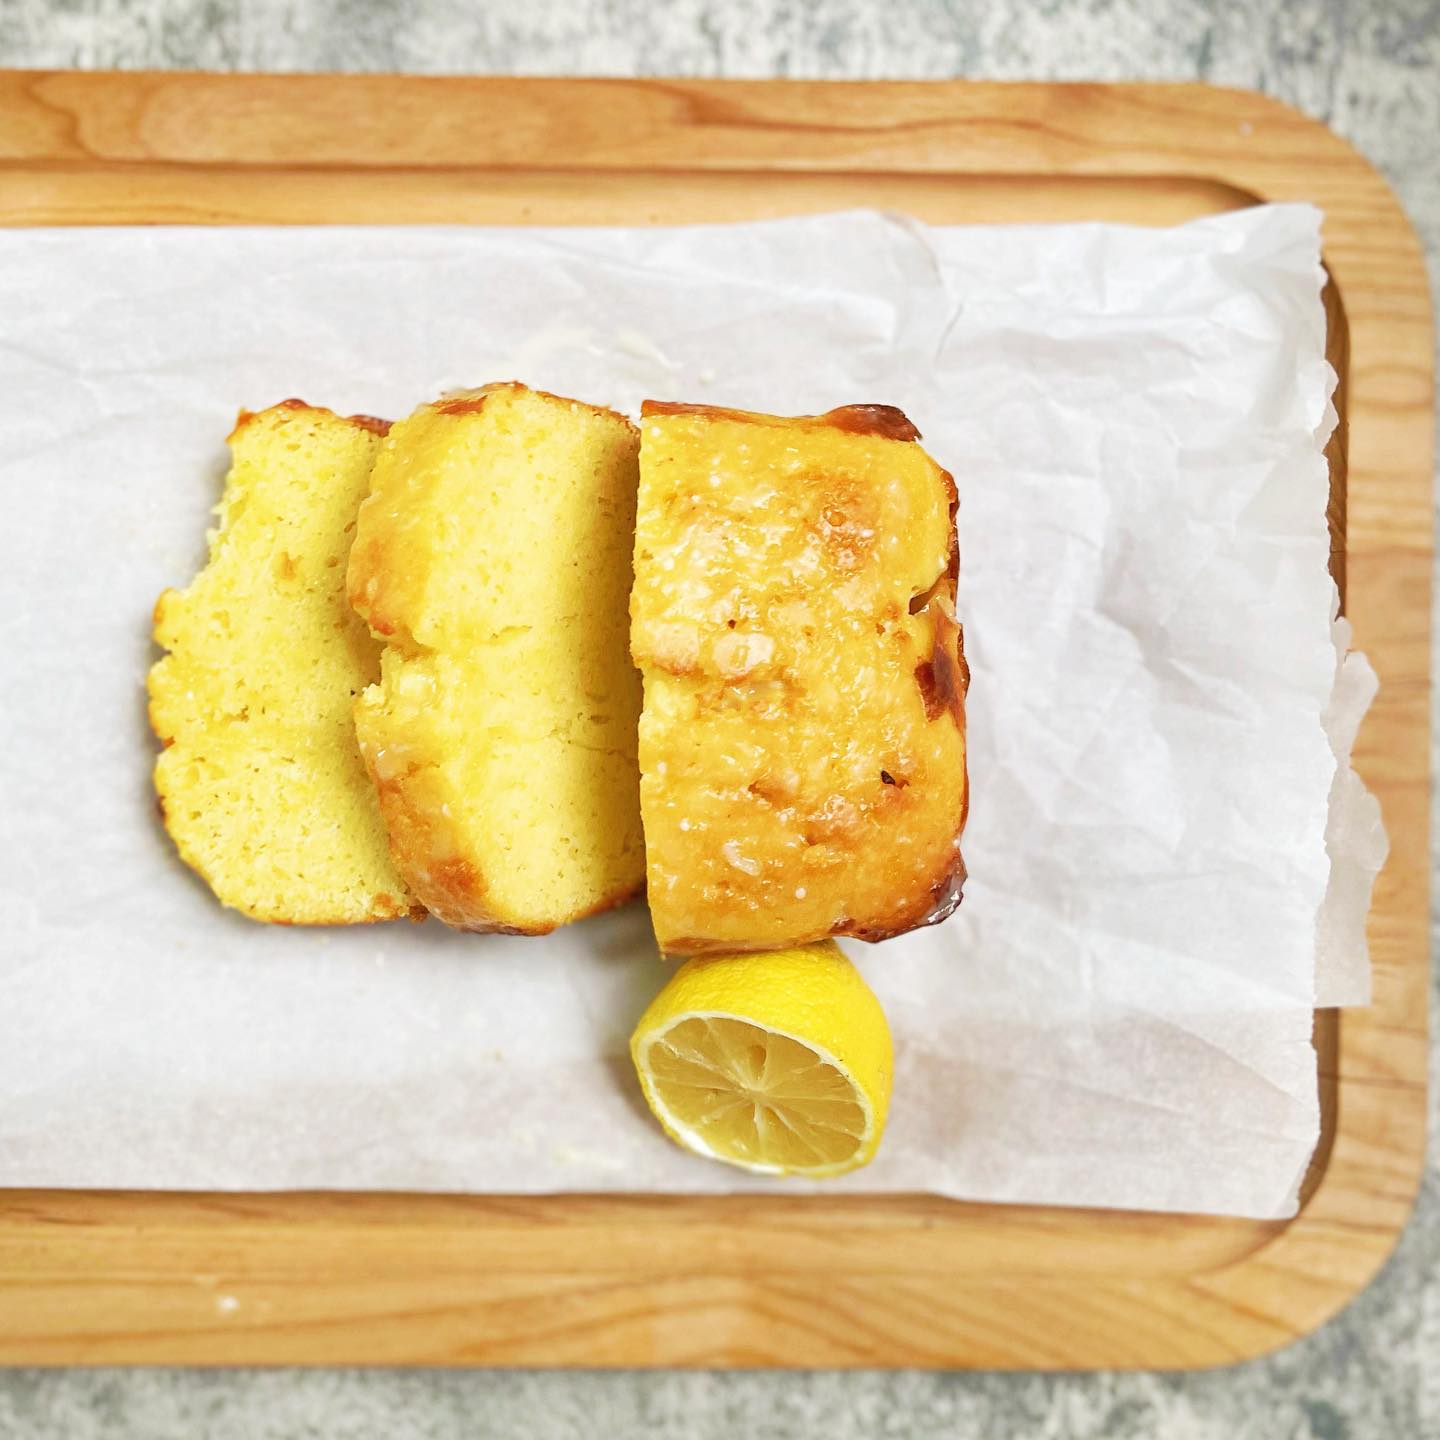 Meyer Lemon Pound Cake recipe now up on the @dinnerreinvented home page! An easy recipe to make with kids, in fact this recipe was created by my son and was a fun baking activity to do together! #poundcake #lemon #meyerlemon #lemoncake #baking #kidsbaking #bakingwithkids #easyrecipes #cakerecipe #birthdaycake #citrus #citrusseason #dinnerreinvented